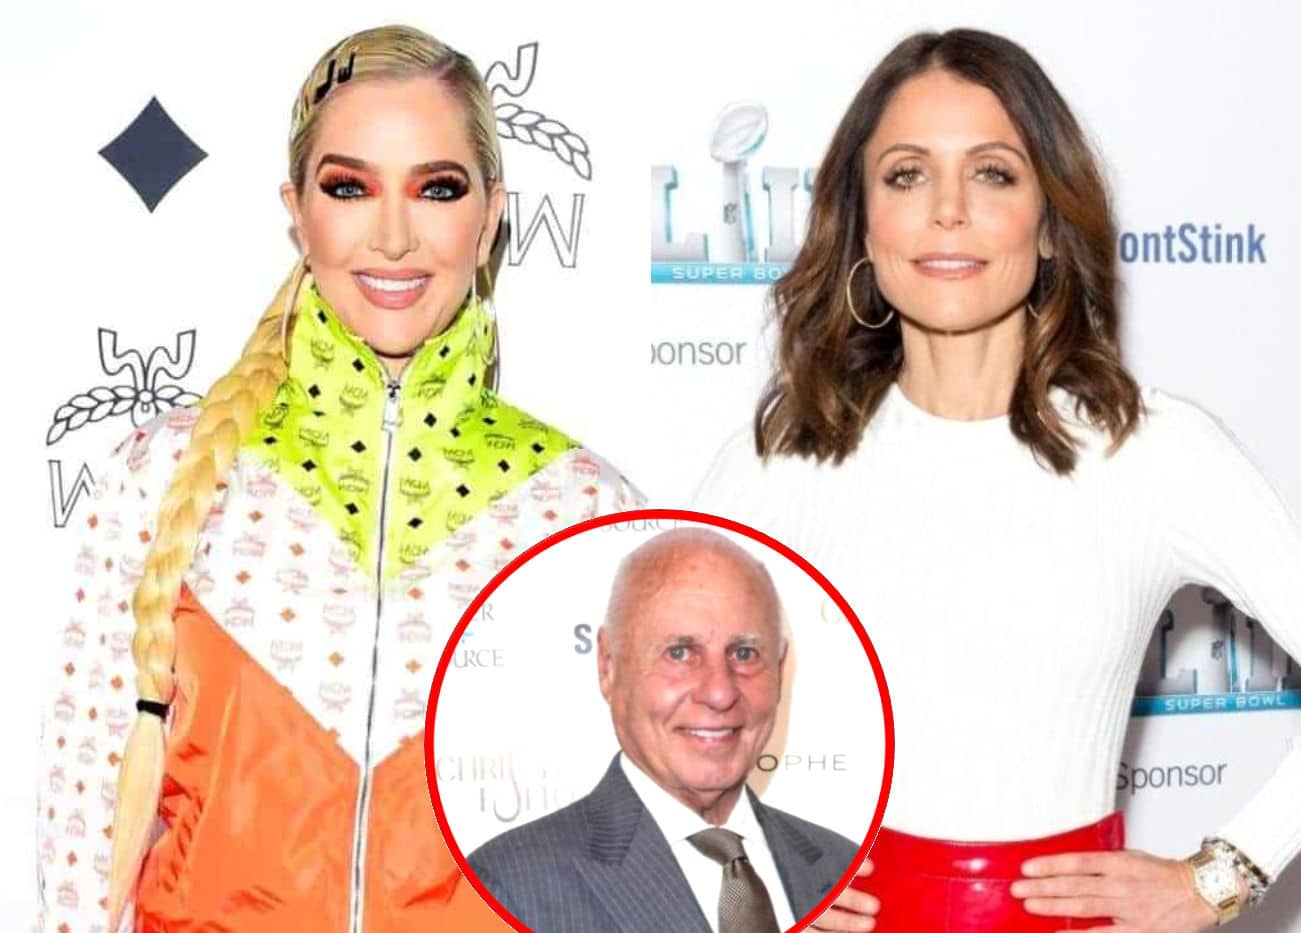 RHOBH's Erika Jayne Reacts to Bethenny's Claims Against Tom, Tells LVP "Go F-ck Yourself," and Talks Jen Shah Comparisons, Plus Divorce Update and Not Forgiving Sutton